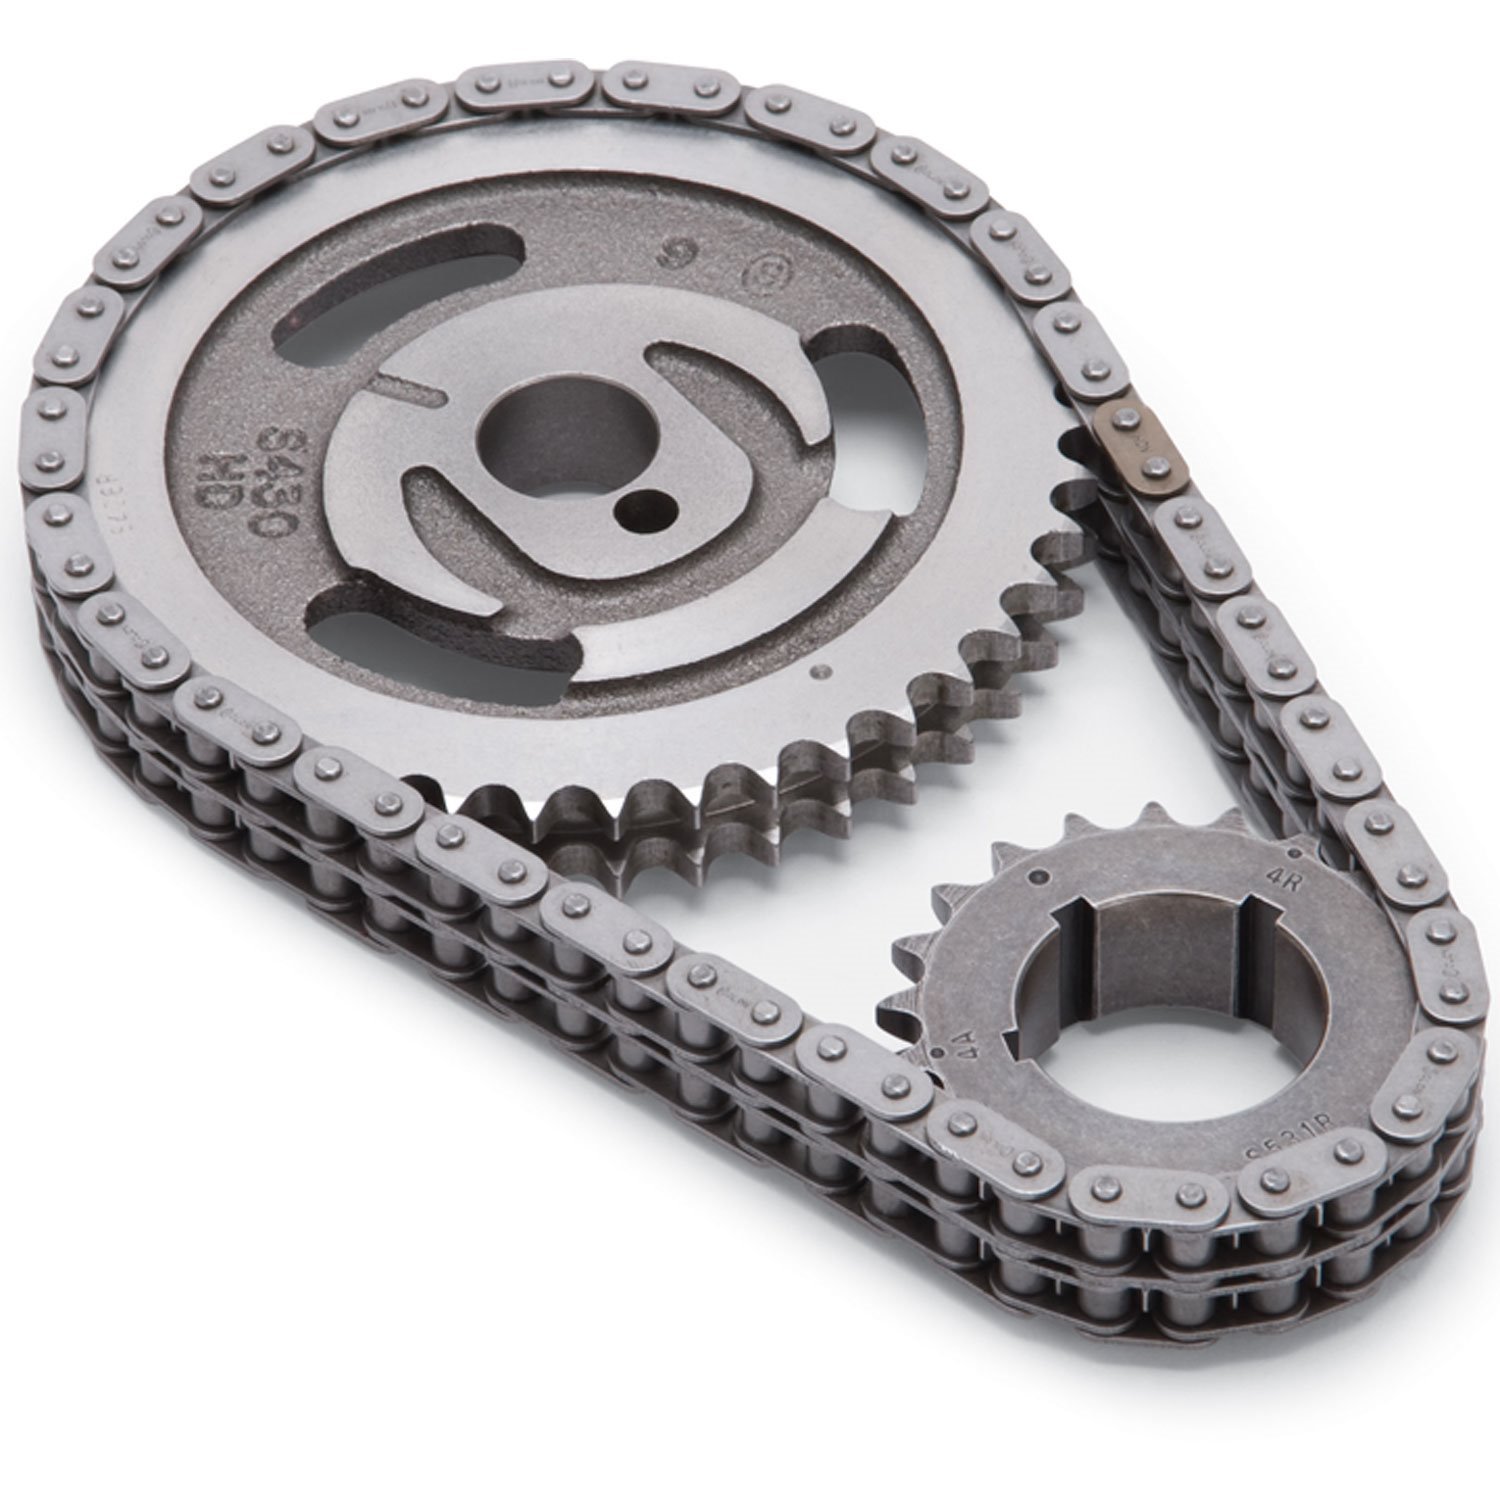 Performer-Link Timing Chain Set for 1962-1984 Small Block